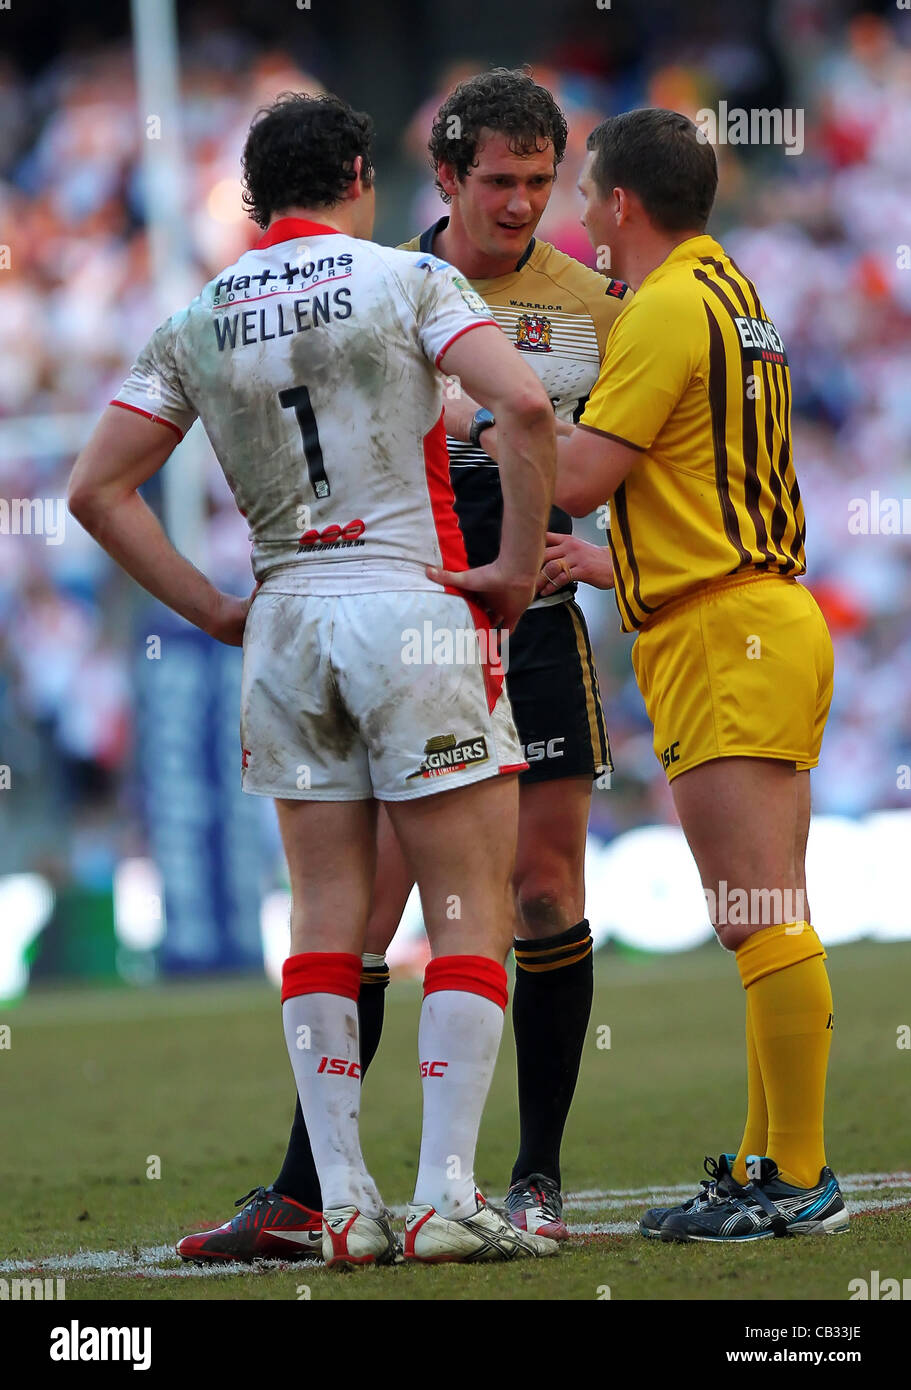 27.05.2012.  Manchester, England. Bradford Bulls v Leeds Rhinos. Referee Ben Thaler calls Wigan Warriors English Loose Forward Sean O'Loughlin and St Helens English Full Back Paul Wellens to him to put a stop to the fighting during the Stobart Super League Rugby Magic Weekend from the Etihad Stadium Stock Photo